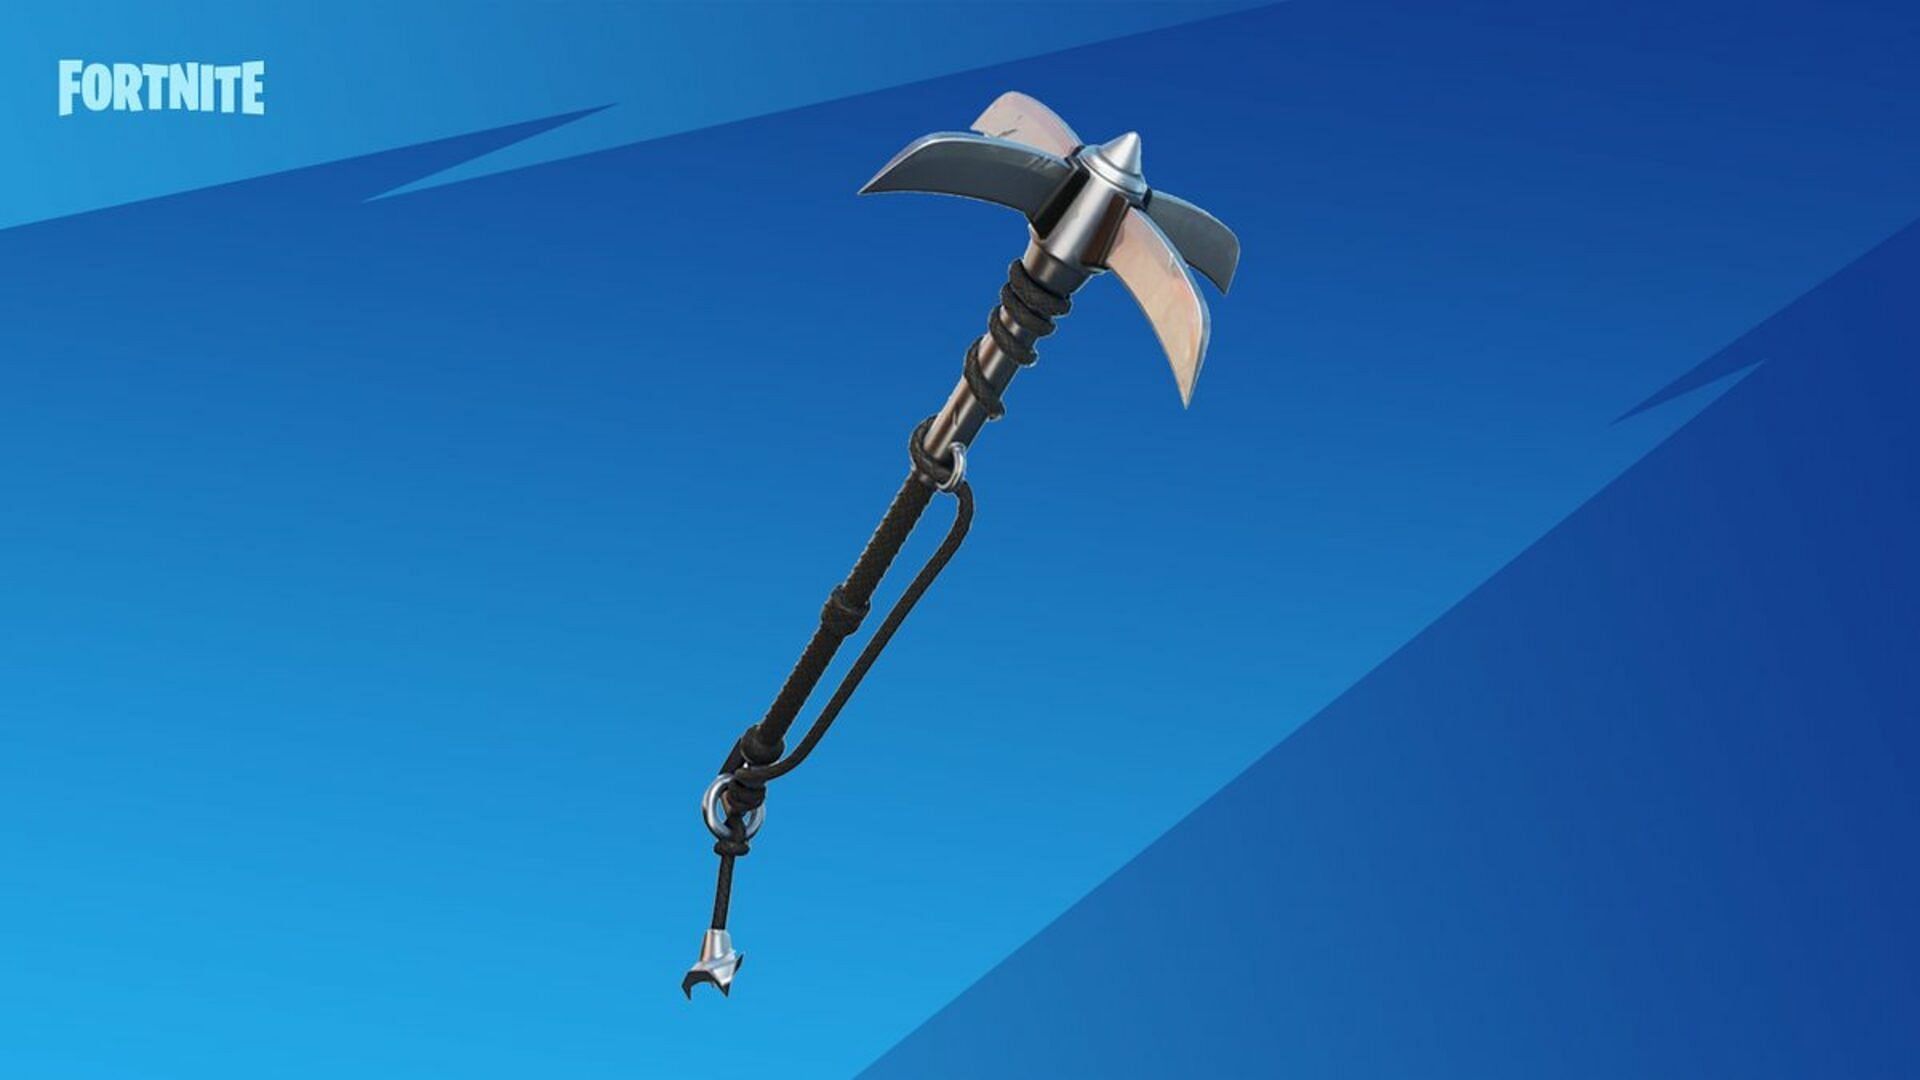 Does 0 delay Fortnite pickaxe actually exist? Debunking the popular myth